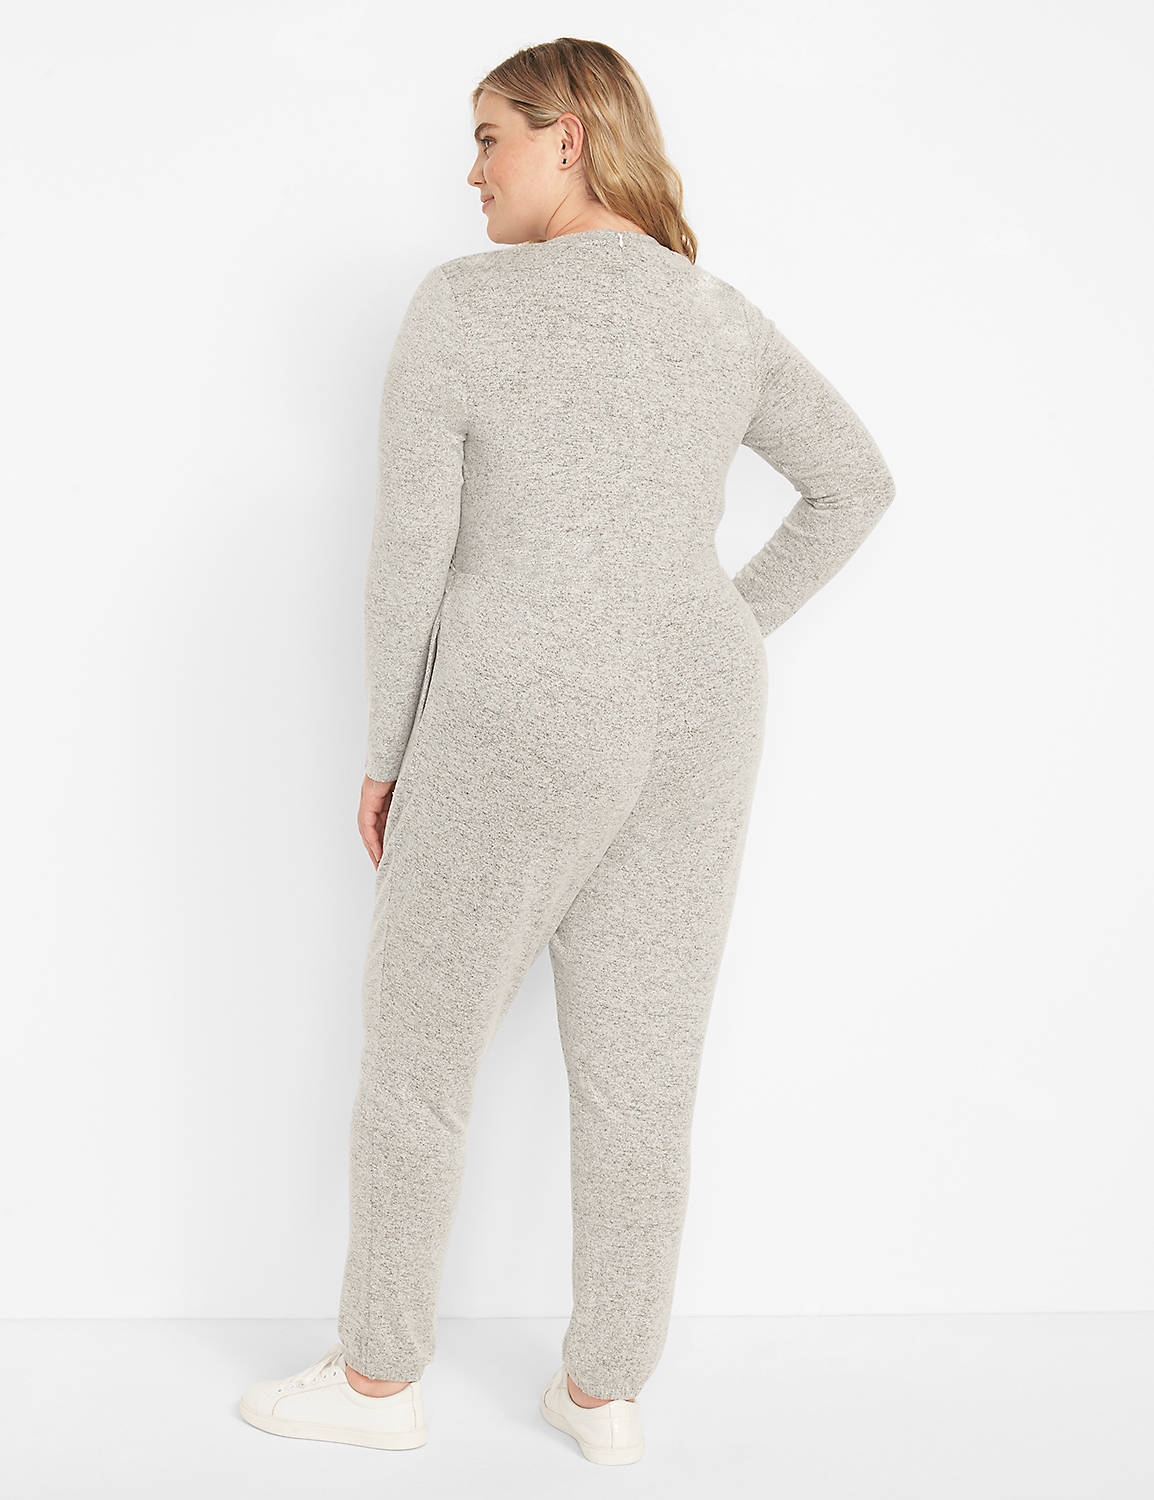 Long Sleeve Crew Neck Crossover Front Jumpsuit 1123659:Hacci Grey Heather:38/40 Product Image 2